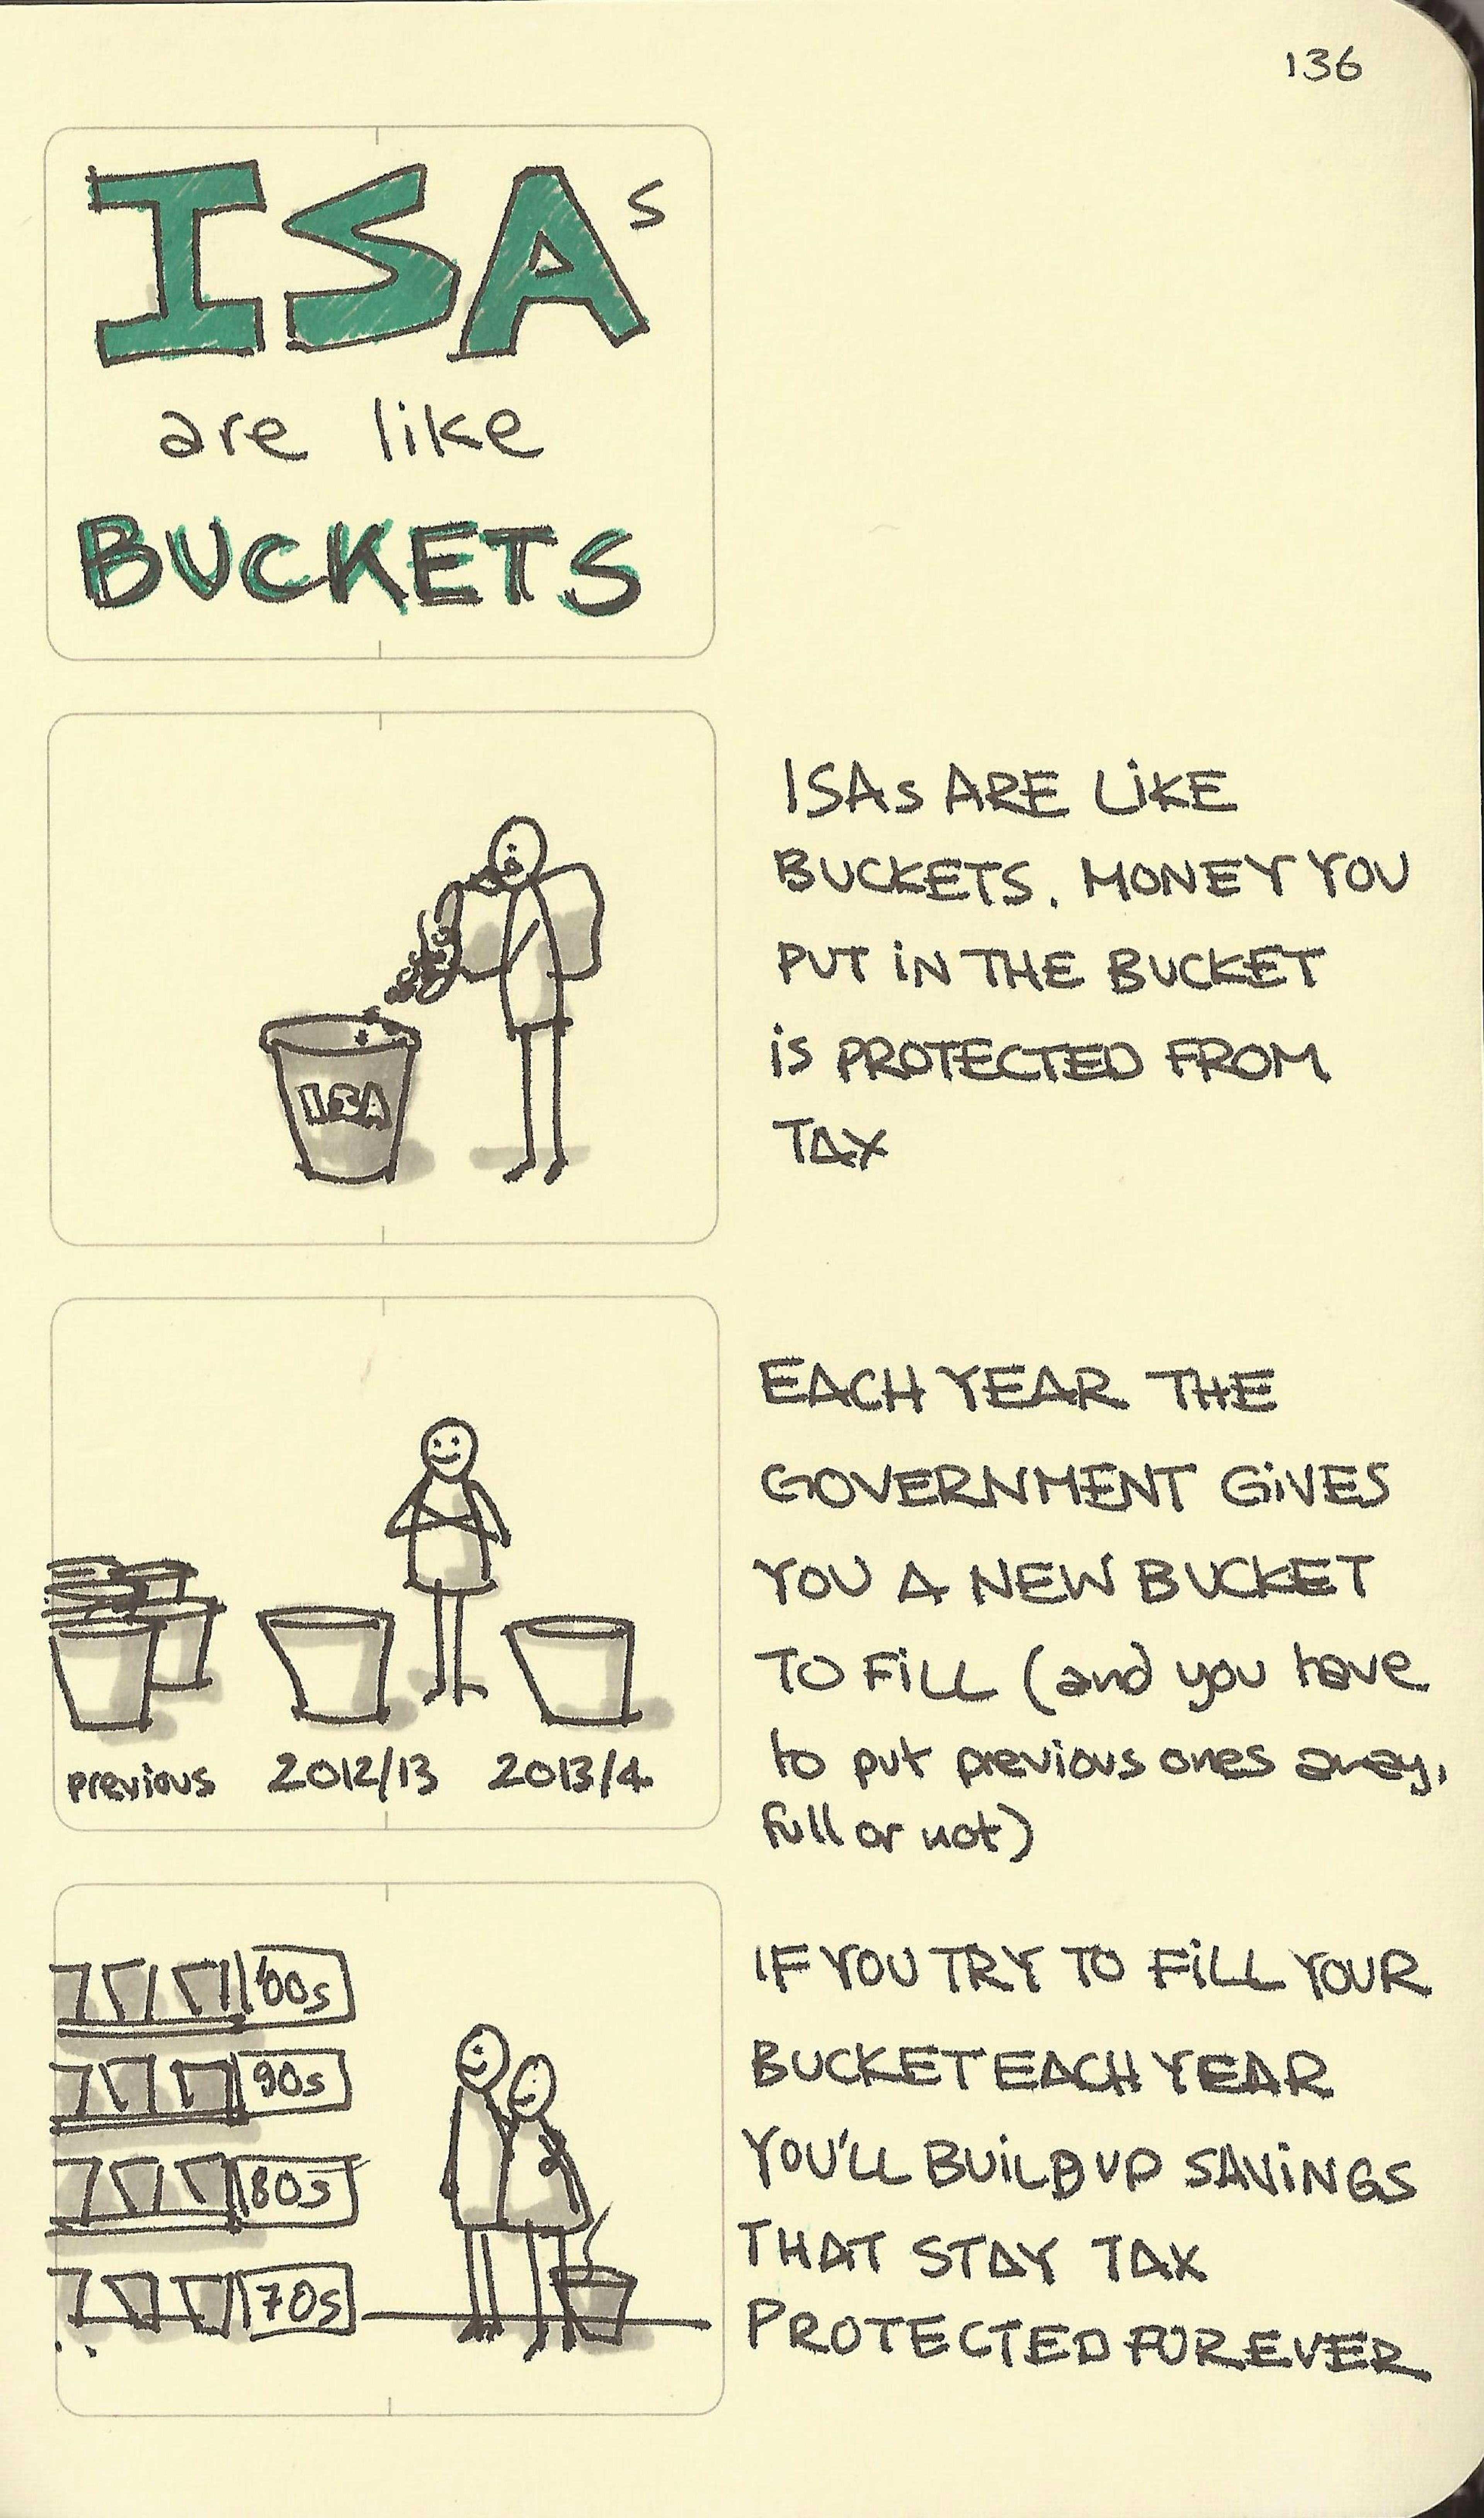 ISAs are like buckets - Sketchplanations